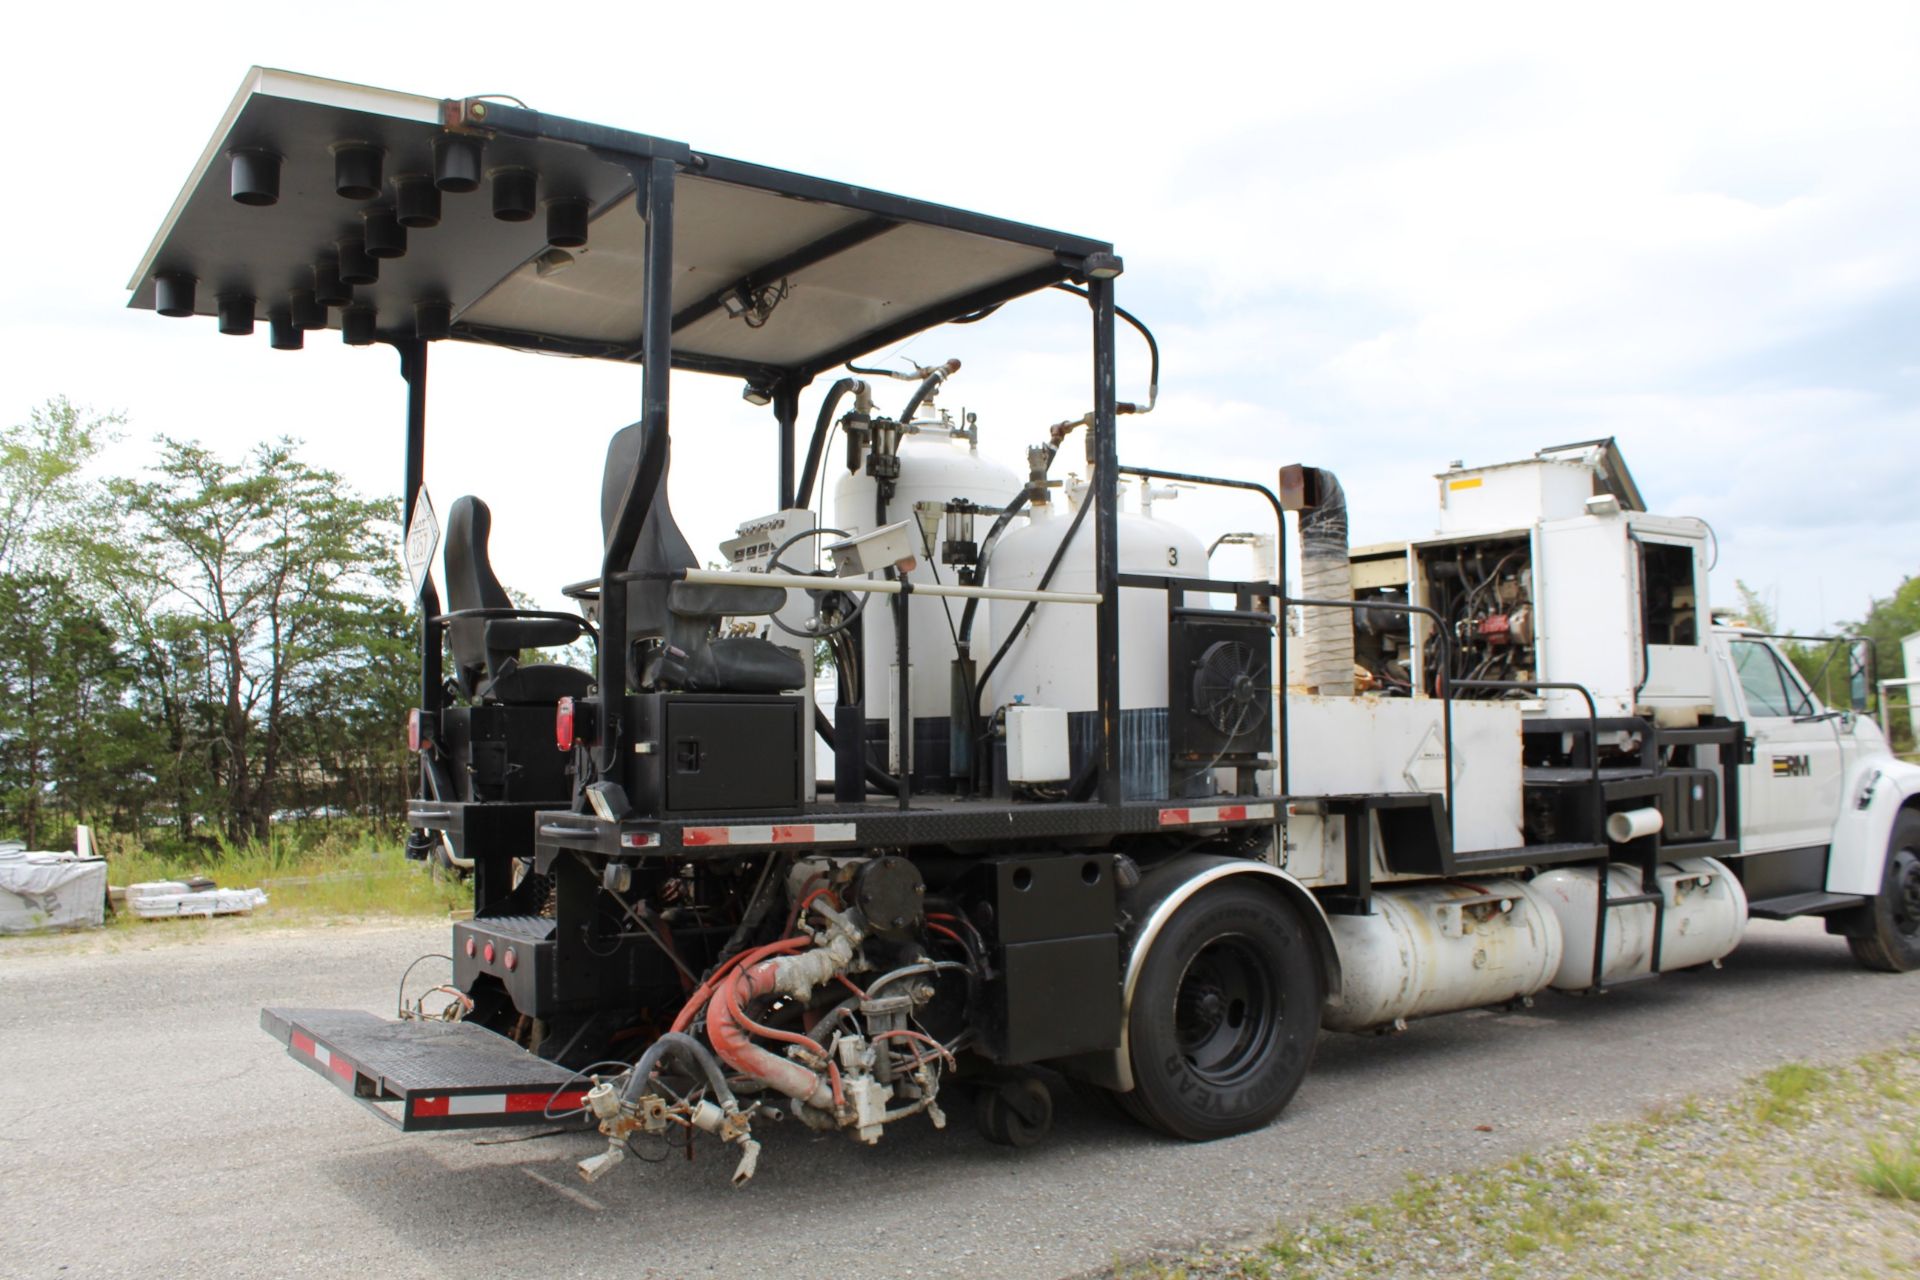 2004 MRL 4000 PT Paint Striper, s/n 04404 mounted on 1995 Ford F800 VIN 1FDWF80C1SVA44334 14 DAY - Image 3 of 7